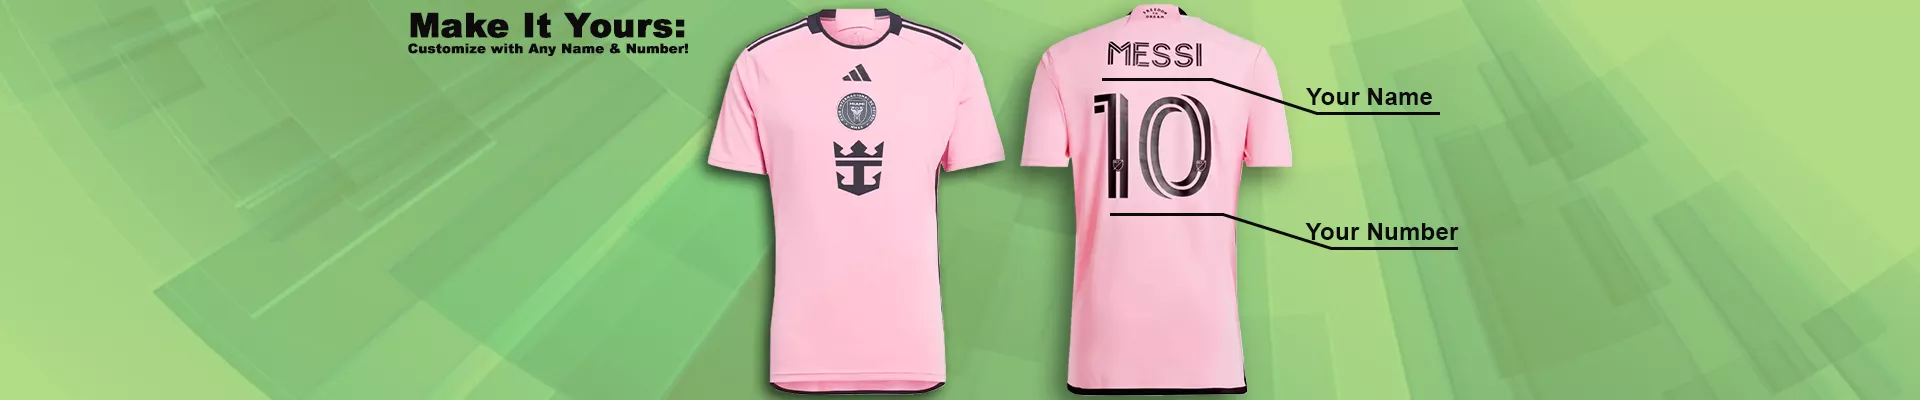 Customized Name & Number - bestsoccerstore